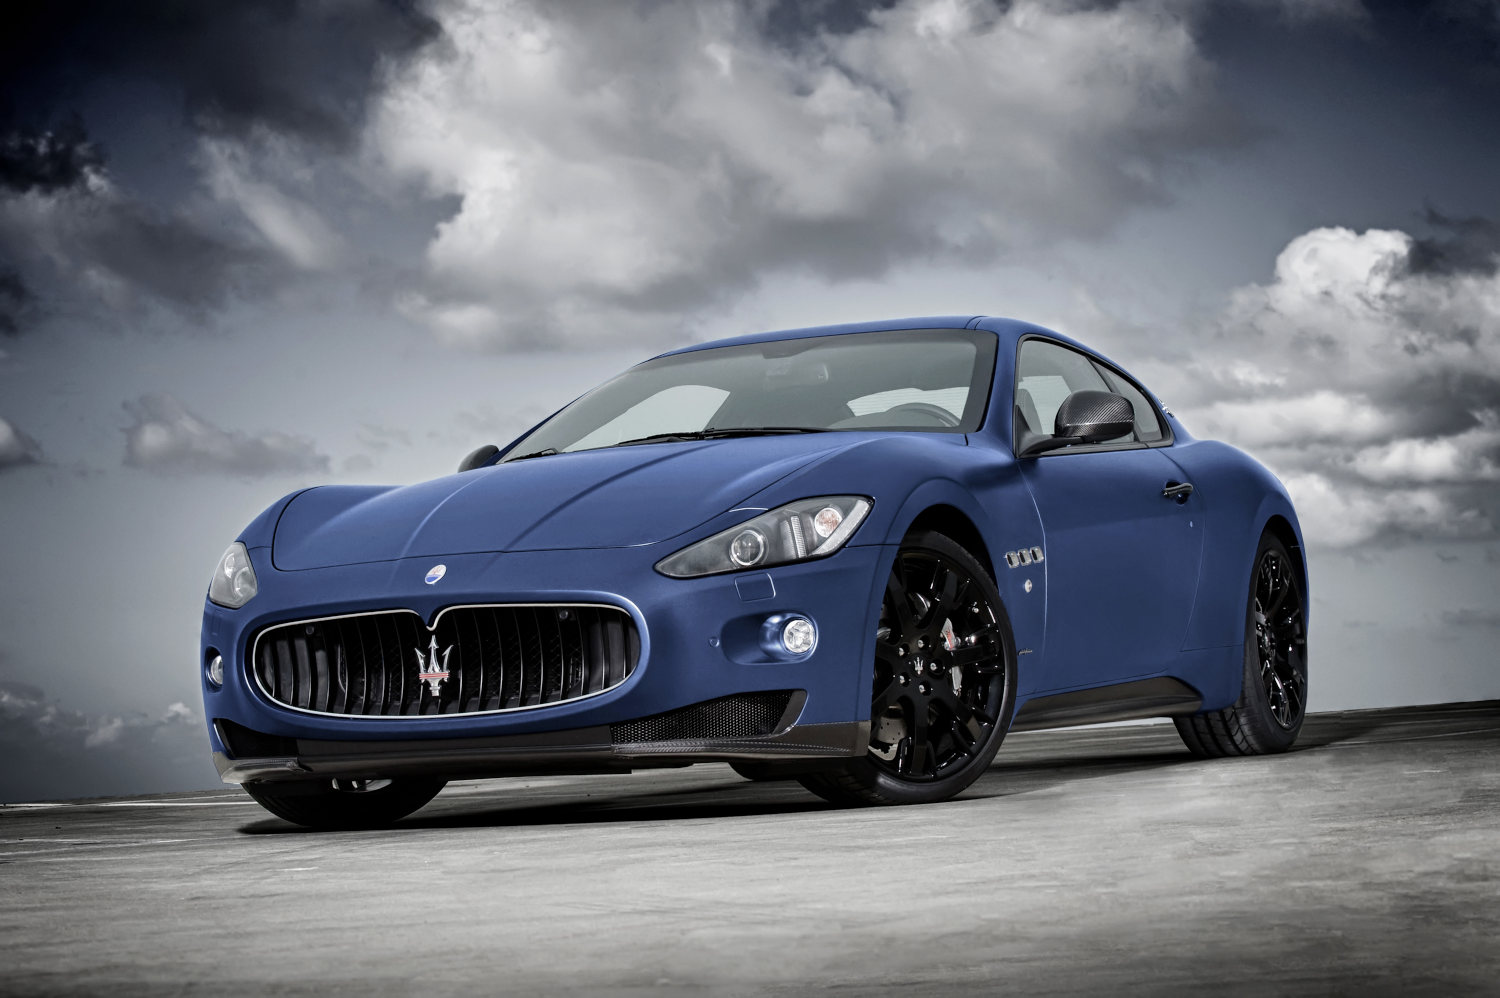 The Taylor Swift Red album discusses a Maserati supercar like this one